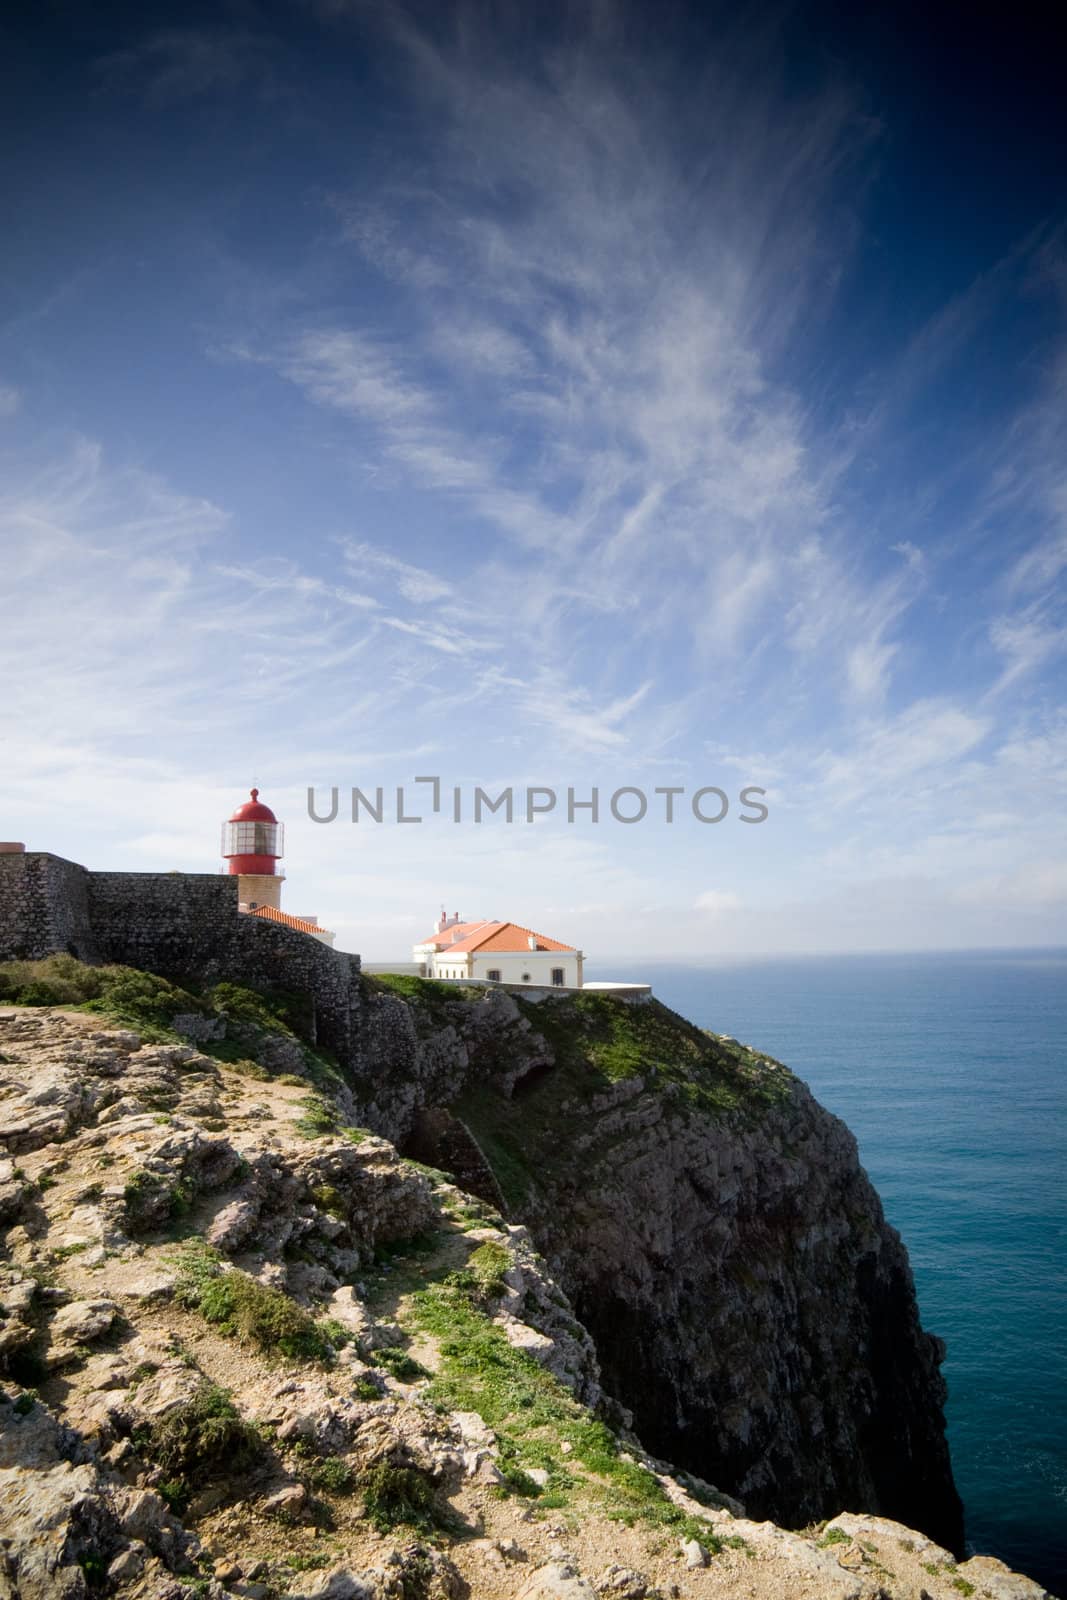 Lighthouse on the cliffs by woodygraphs